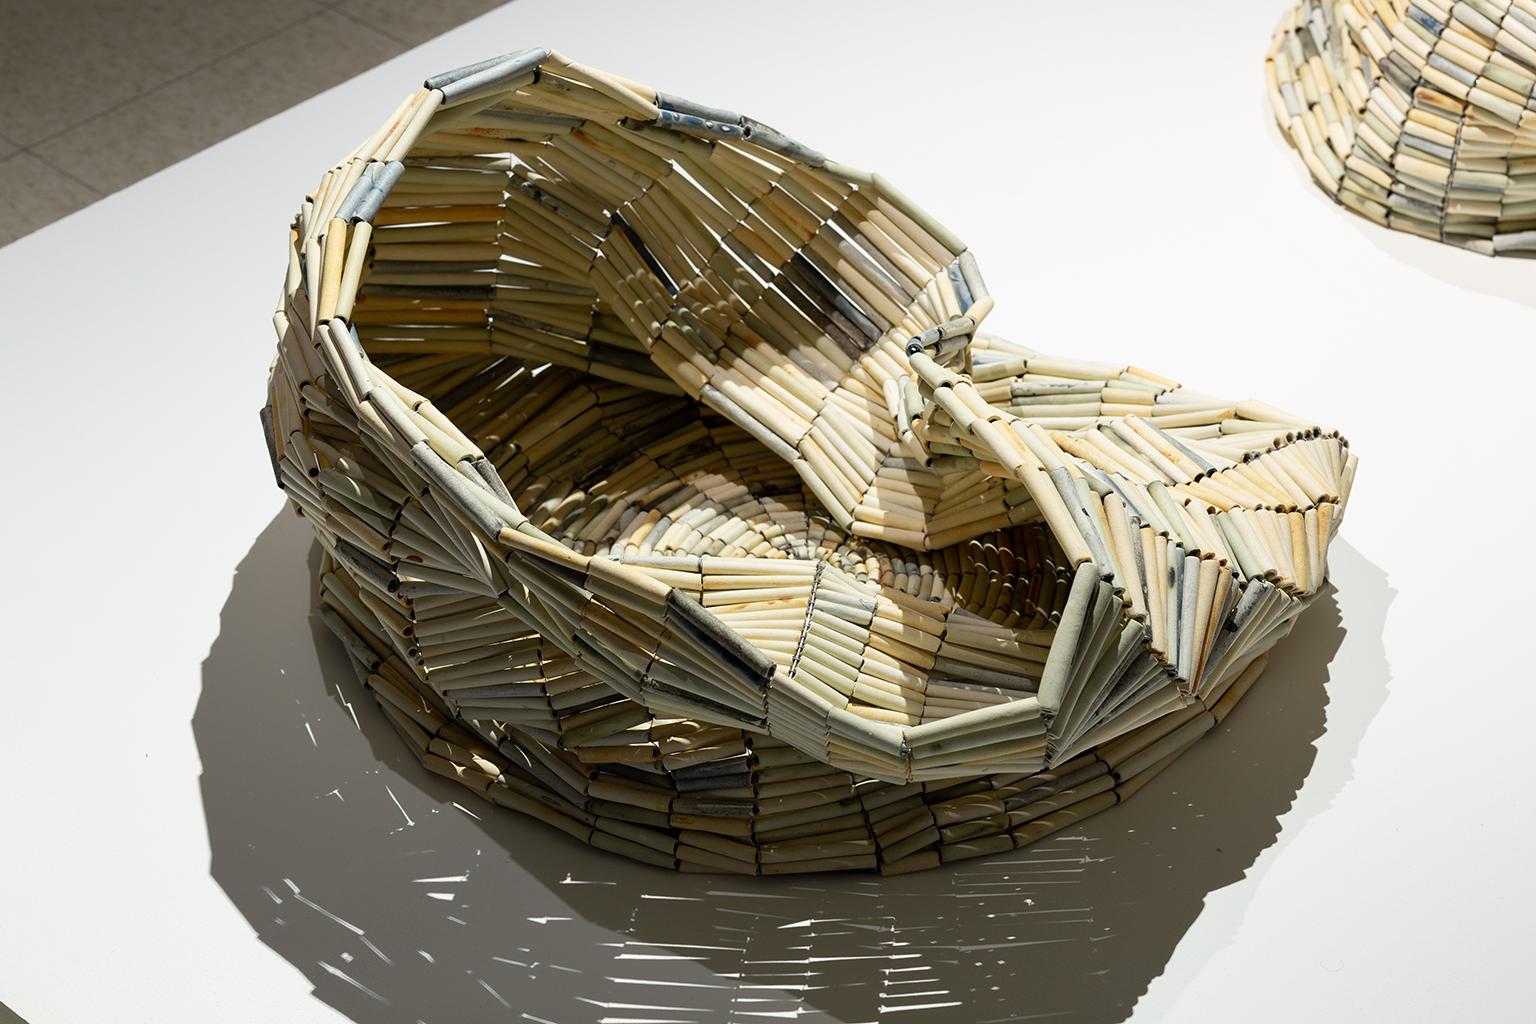 Untitled (Tobacco Barrel) - Contemporary Sculpture by Nadia Myre